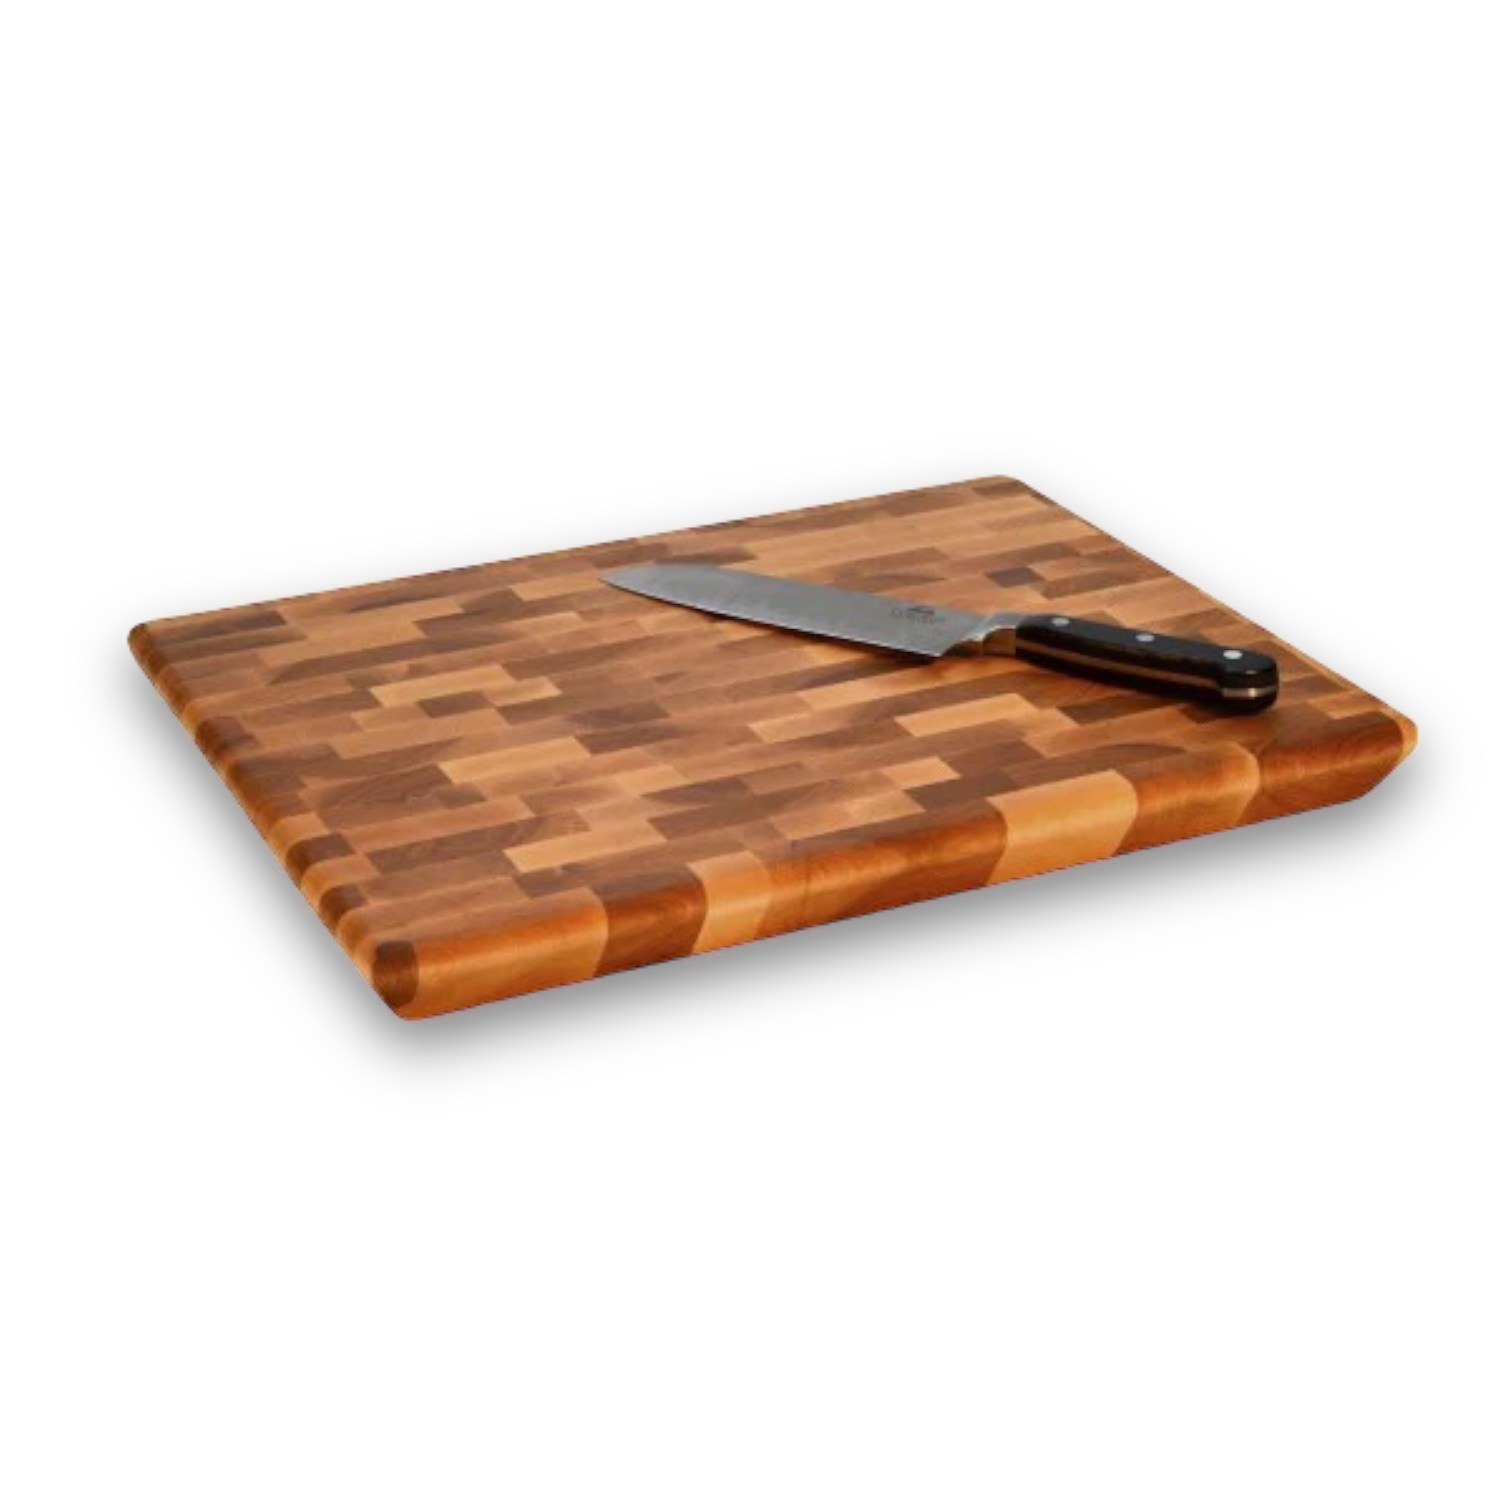 End Grain Chopping Bowl with Knife from the Vermont Bowl Company